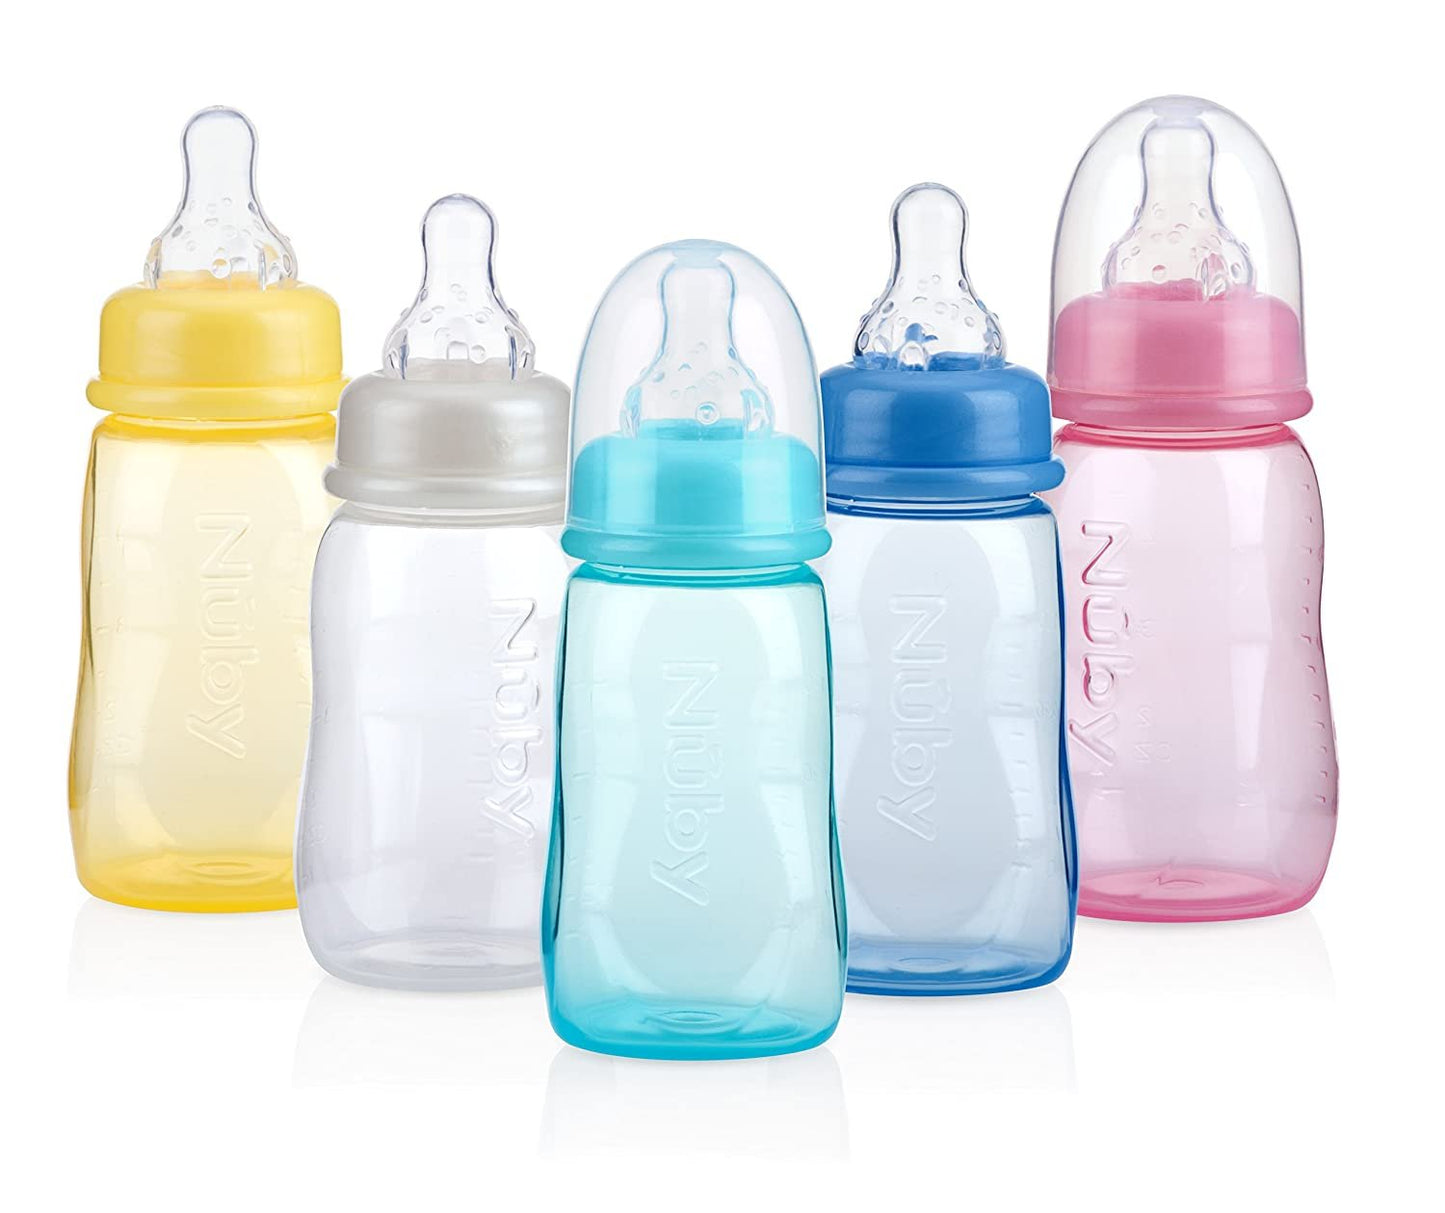 1 Pack Nuby Standard Neck Tinted Feeding Nurser, 4 Ounce, Colors May Vary